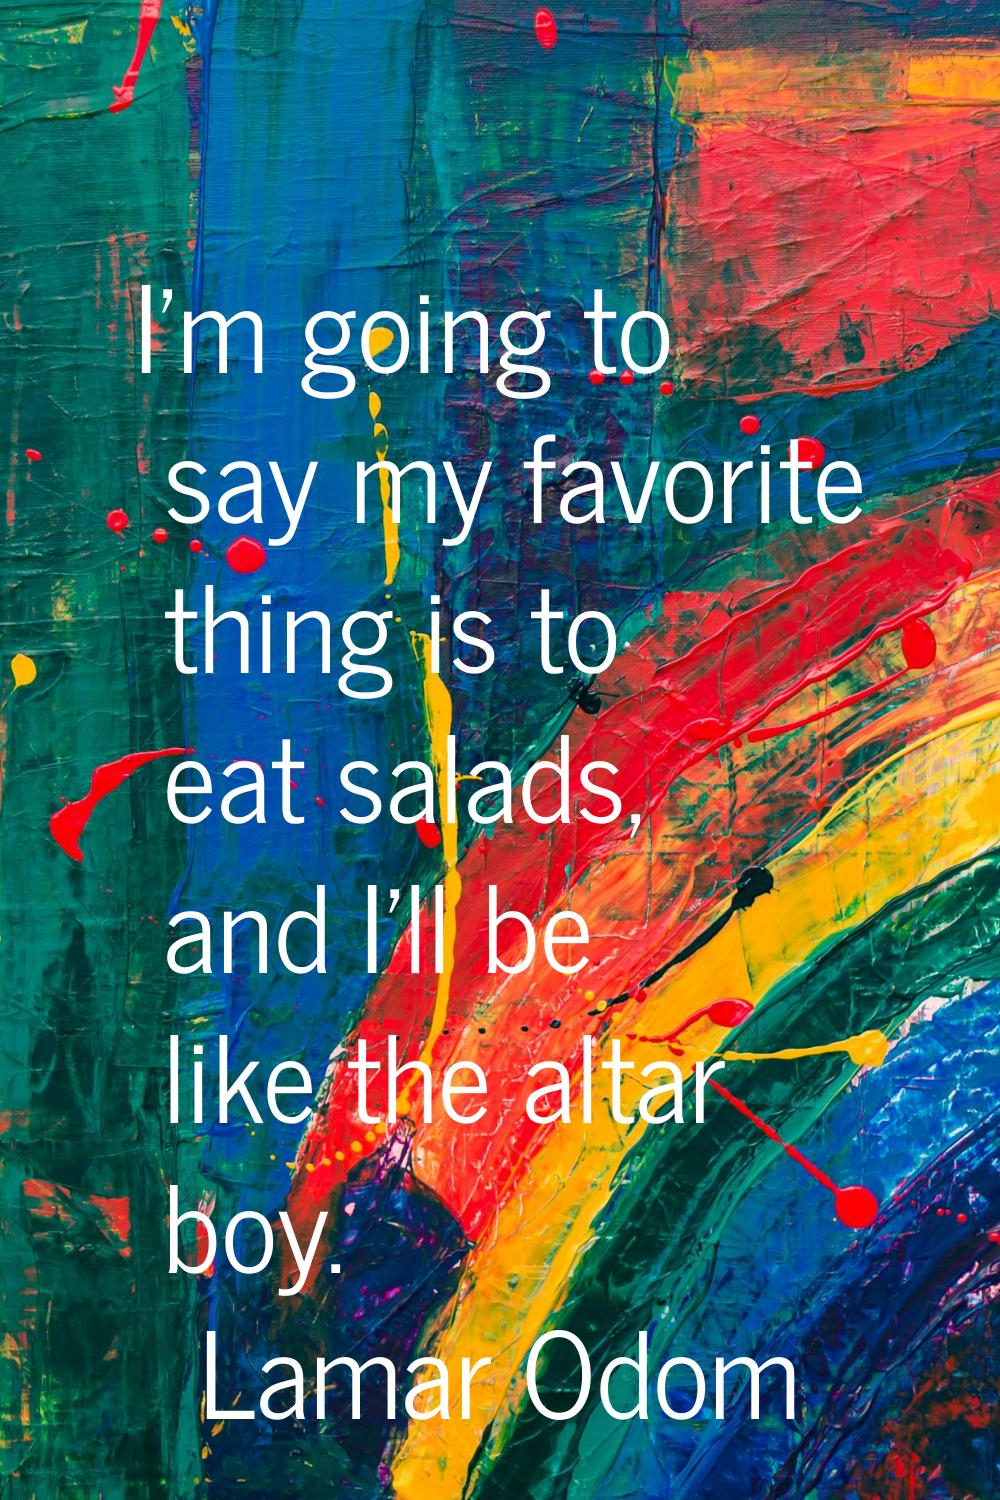 I'm going to say my favorite thing is to eat salads, and I'll be like the altar boy.